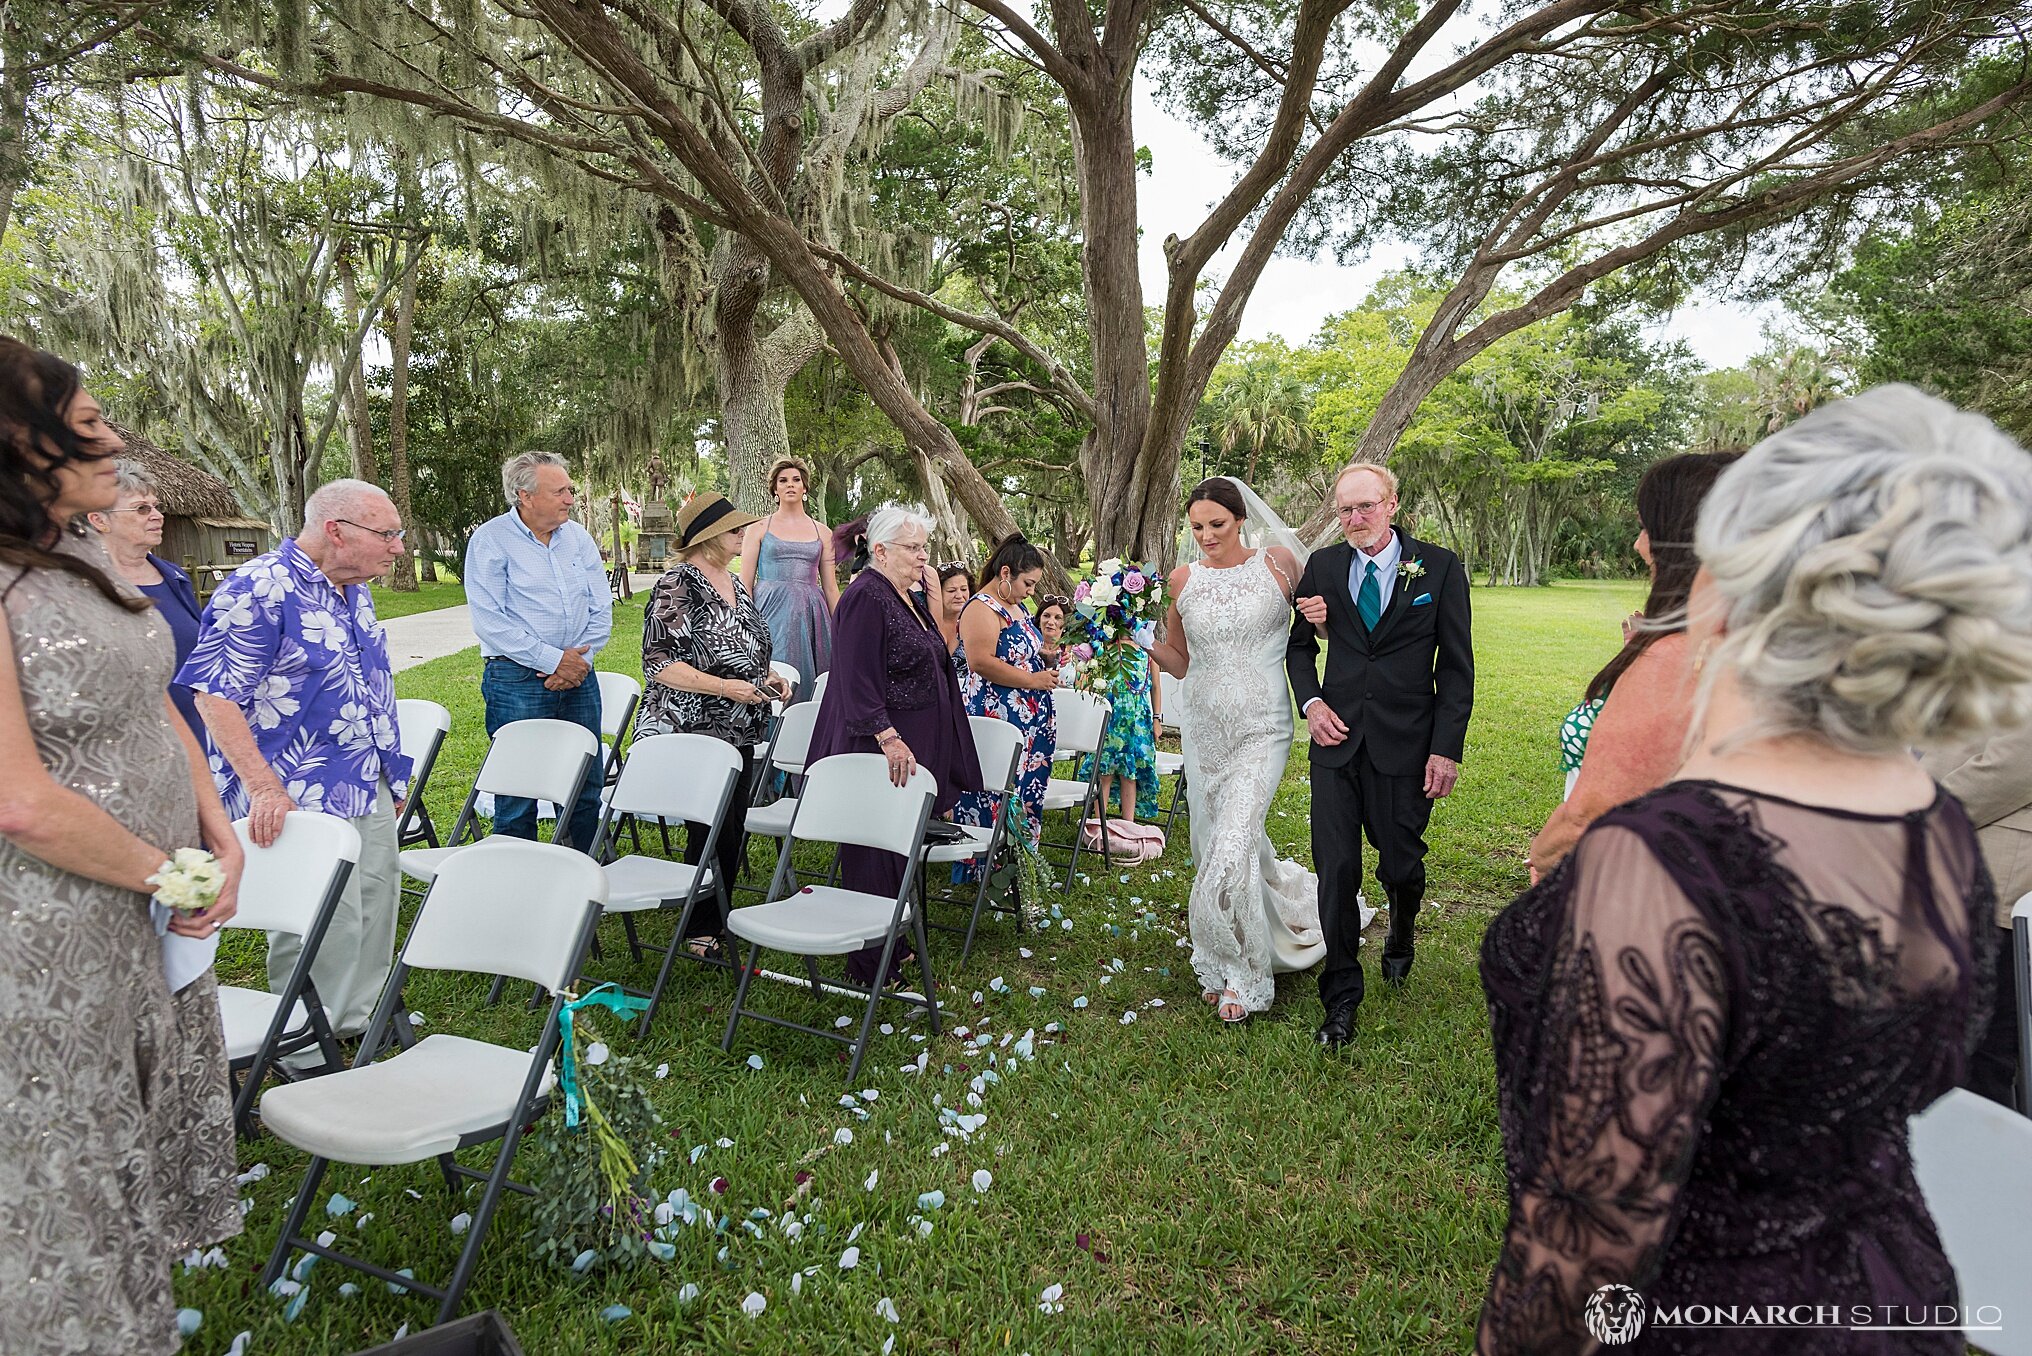 029-Affordable-Wedding-Photographer-in-st-augustine.jpg